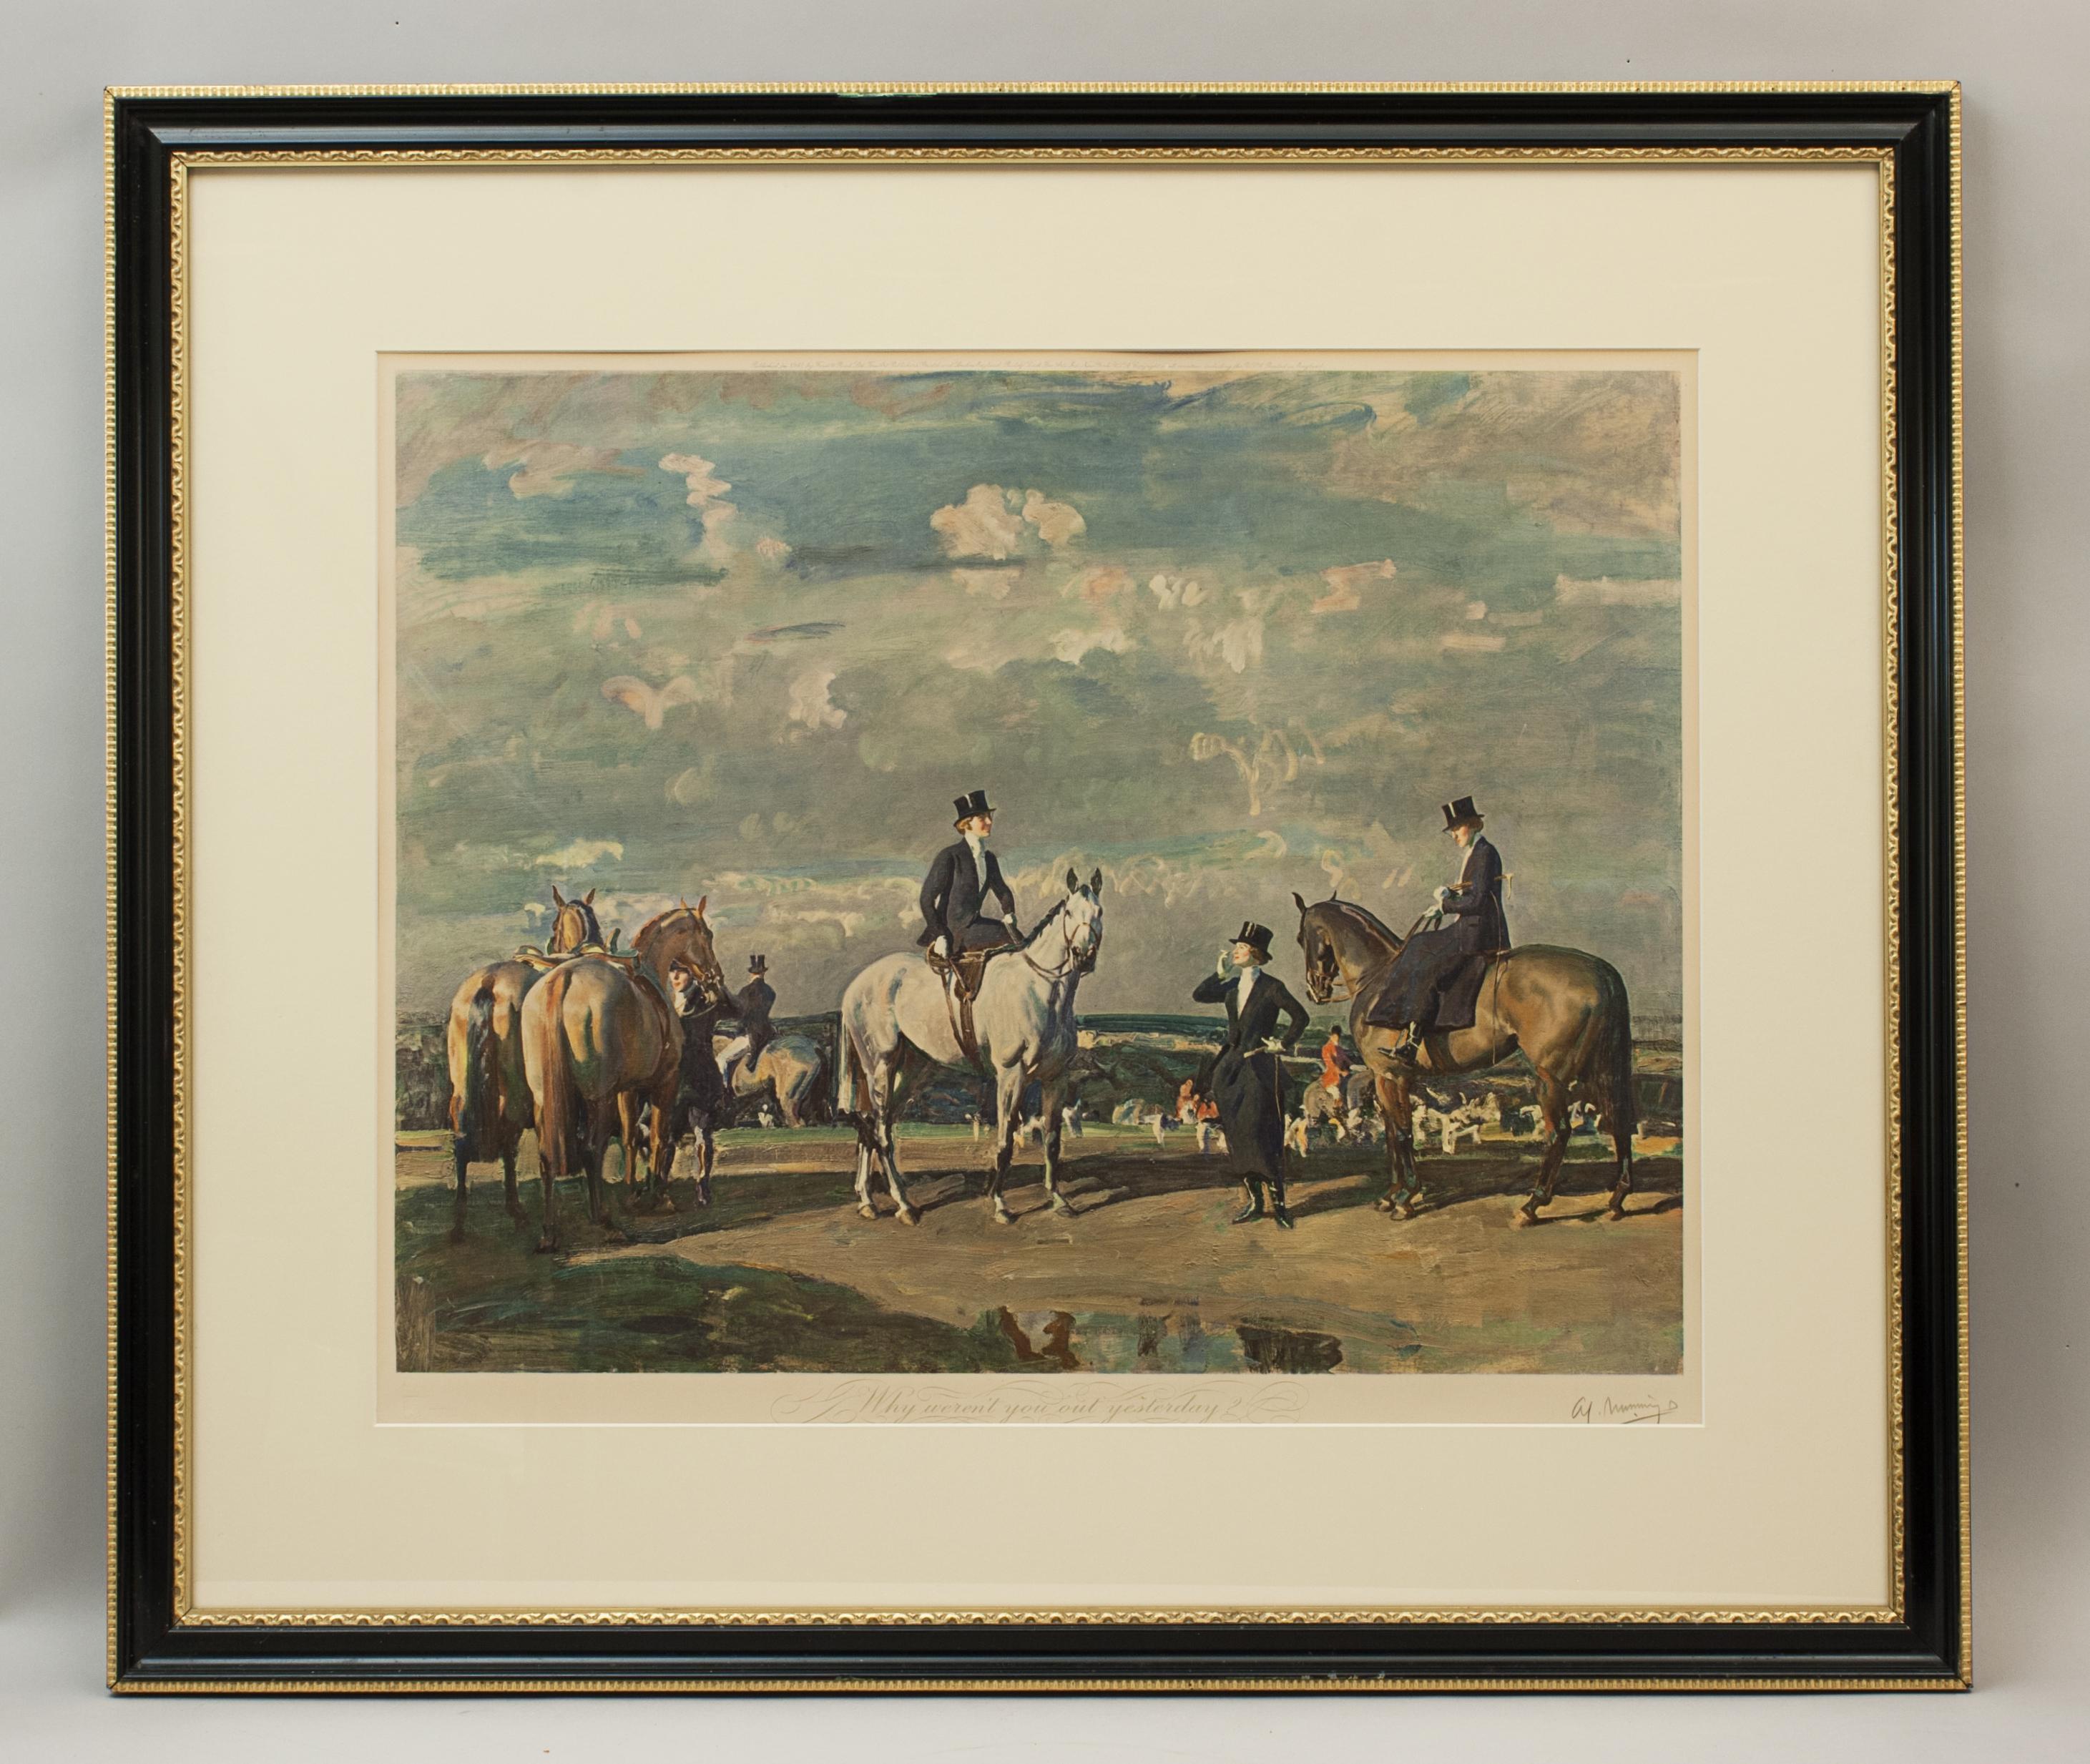 Equestrian lithograph print by Sir Alfred James Munnings, Why Weren't You Out Yesterday?
An original framed and signed artist's proof print 'Why weren't you out yesterday? by Sir Alfred James Munnings. The equestrian print is signed in pencil in